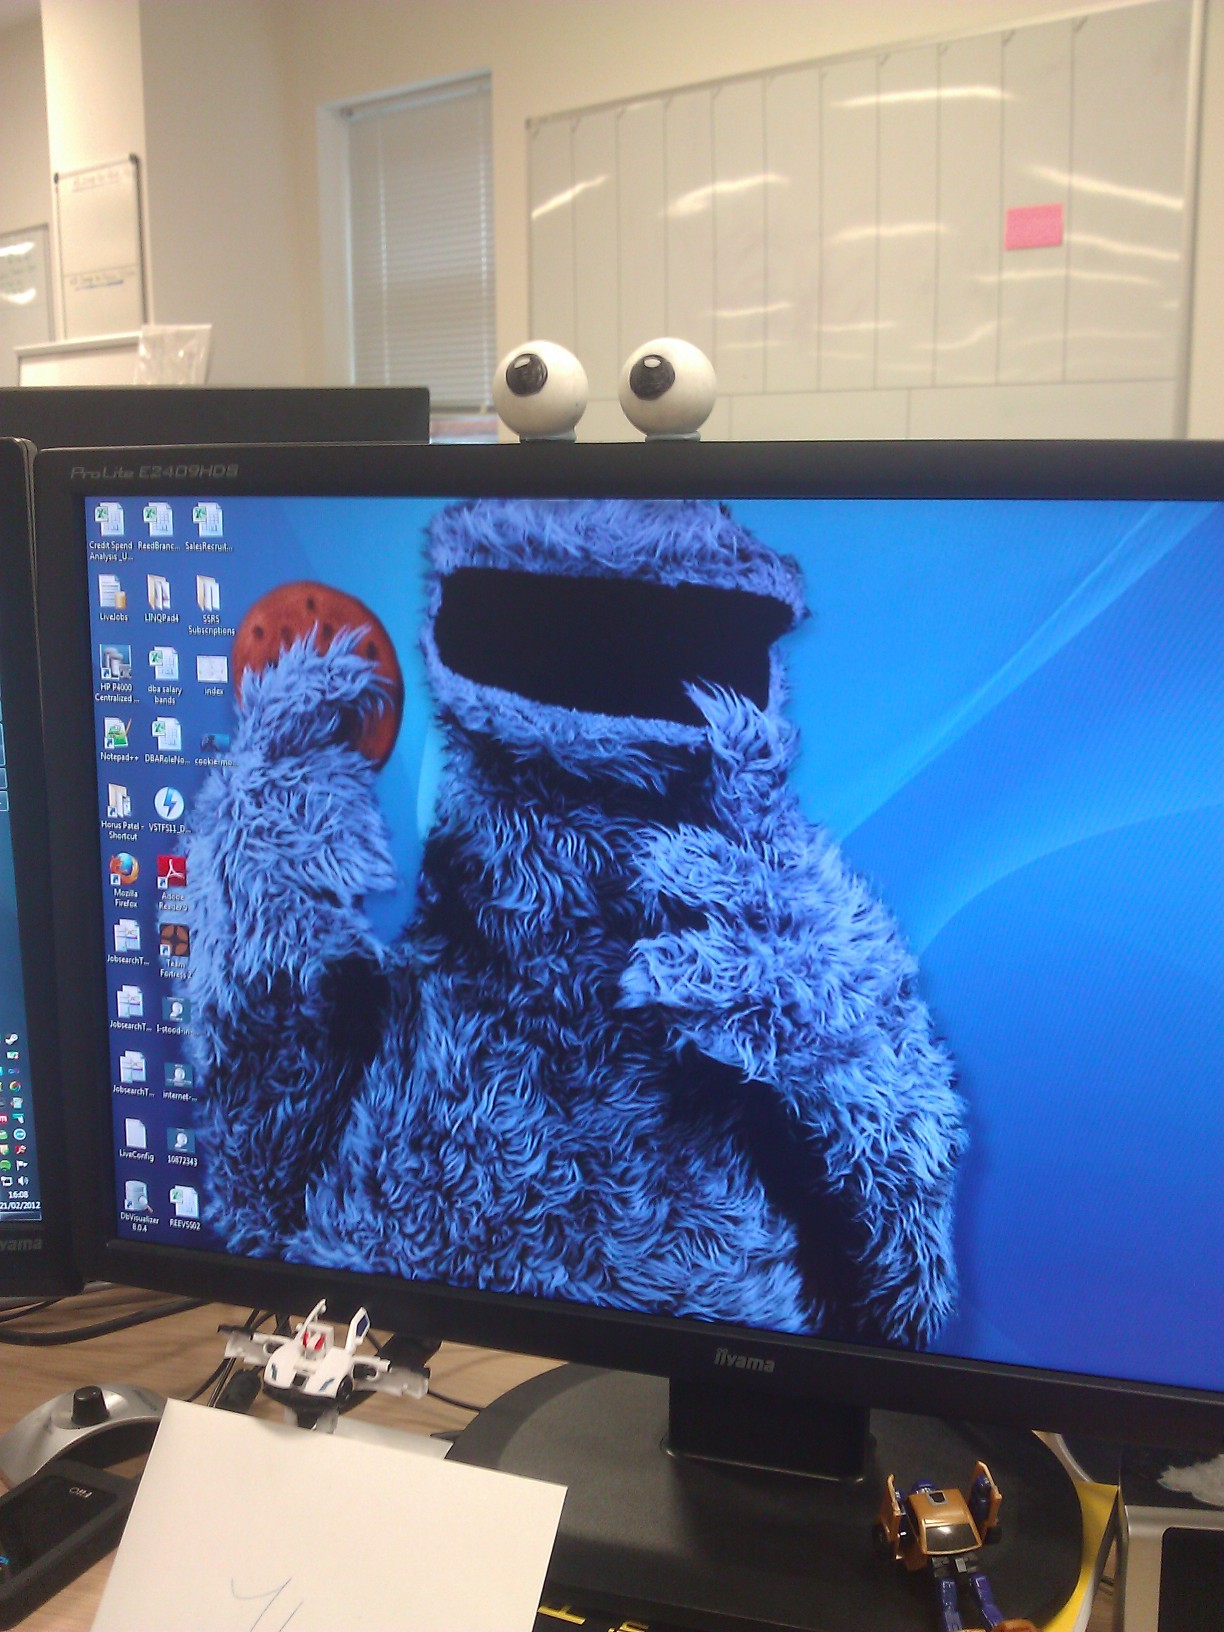 Clever use of a desktop background